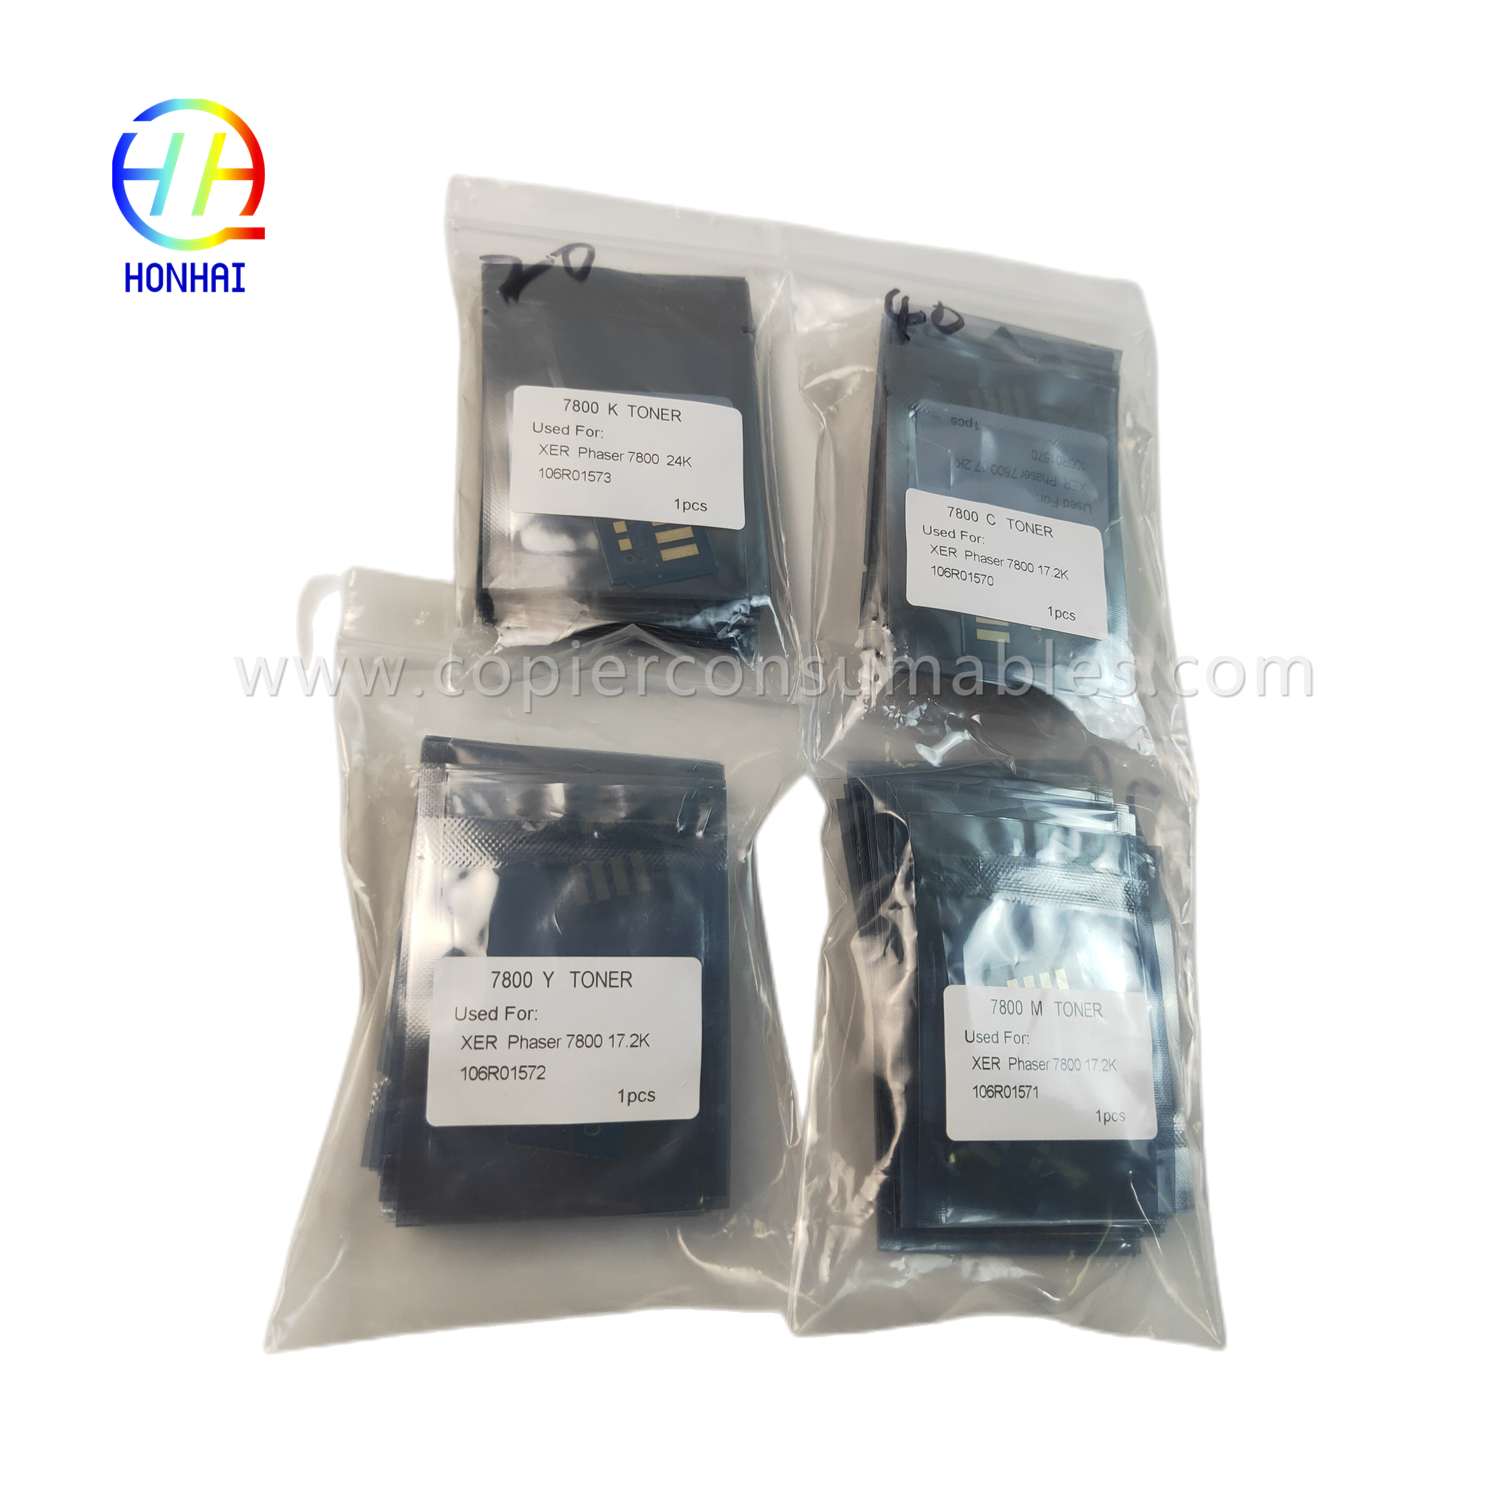 https://www.copierconsumables.com/toner-chip-set-for-xerox-phaser-7800-106r01573-106r01570-106r01571-106r01572-chip-2-product/